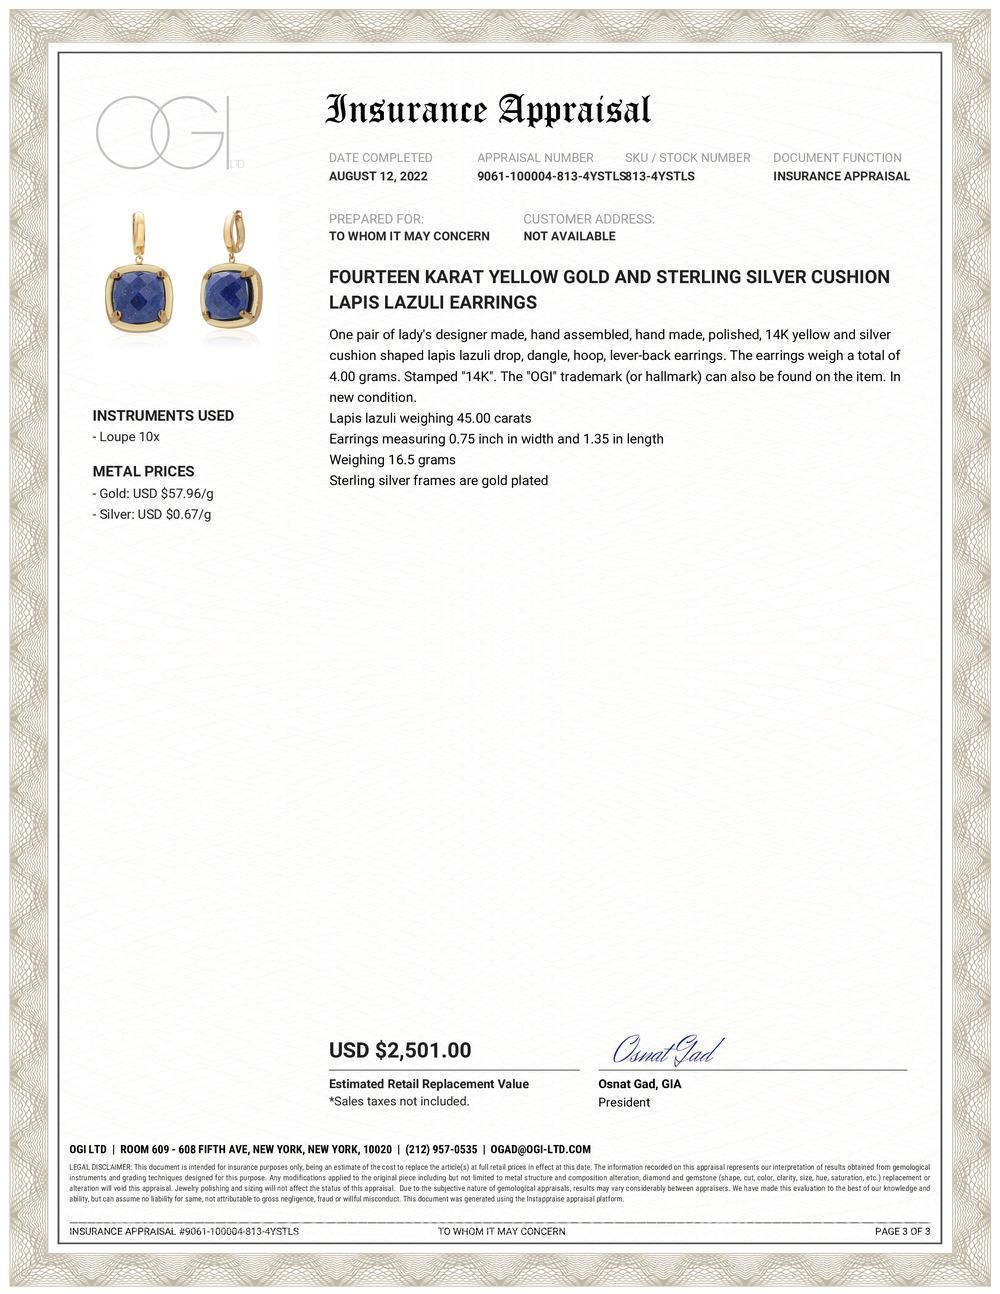 Fourteen karat yellow gold huggie earrings and sterling silver setting with two cushion shaped lapis lazuli drops
Two Lapis Lazuli weighing 45 carats
Earrings measuring 0.75 inch in width and 1.35 in length
Weighing 16.5 grams
Sterling silver frames